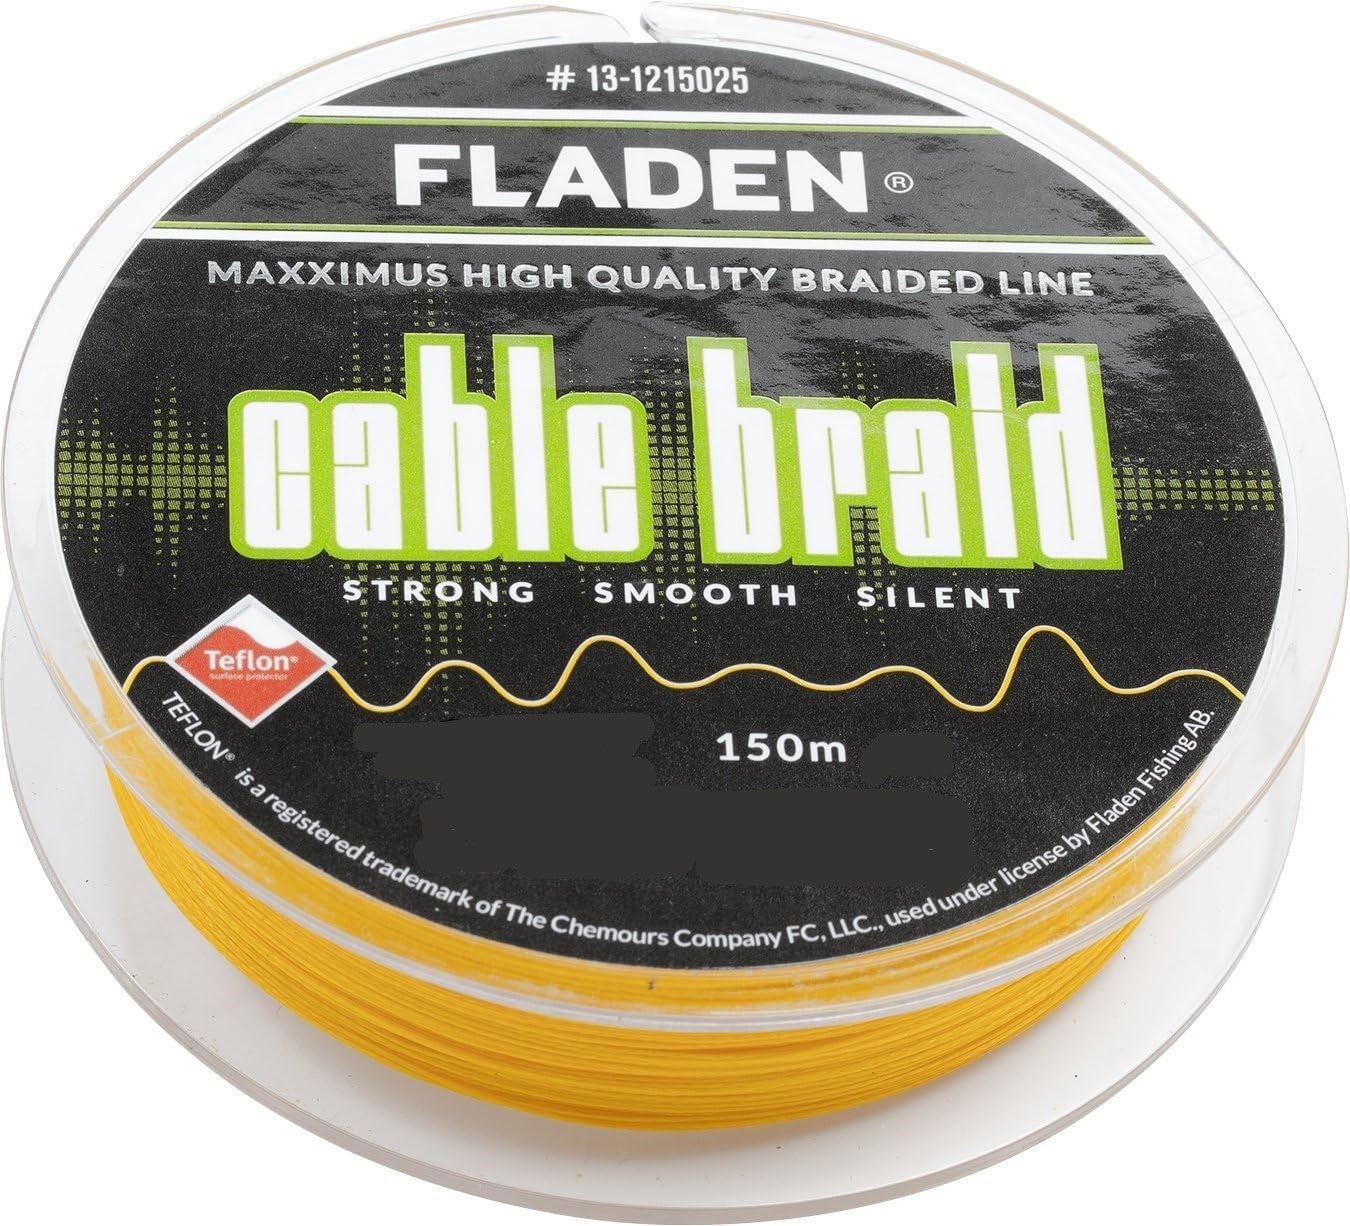 Fladen Cable Braid Yellow High Quality Braided Fishing Line 150m